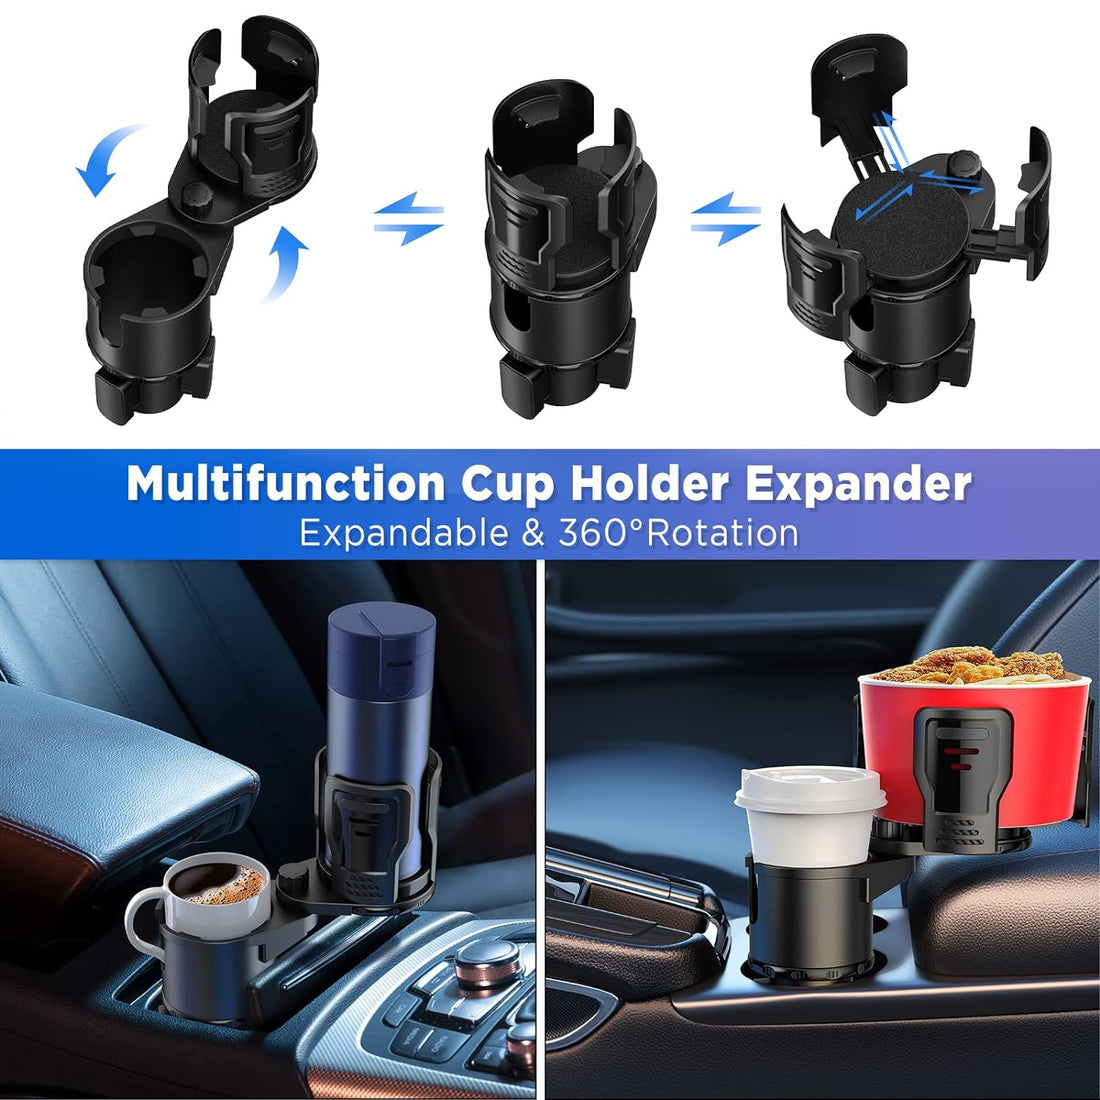 OUTXE Car Cup Holder Expander, Multifunction Drink Adapter Adjustable Expandable Cupholder for Seat Automotive Auto Truck RV